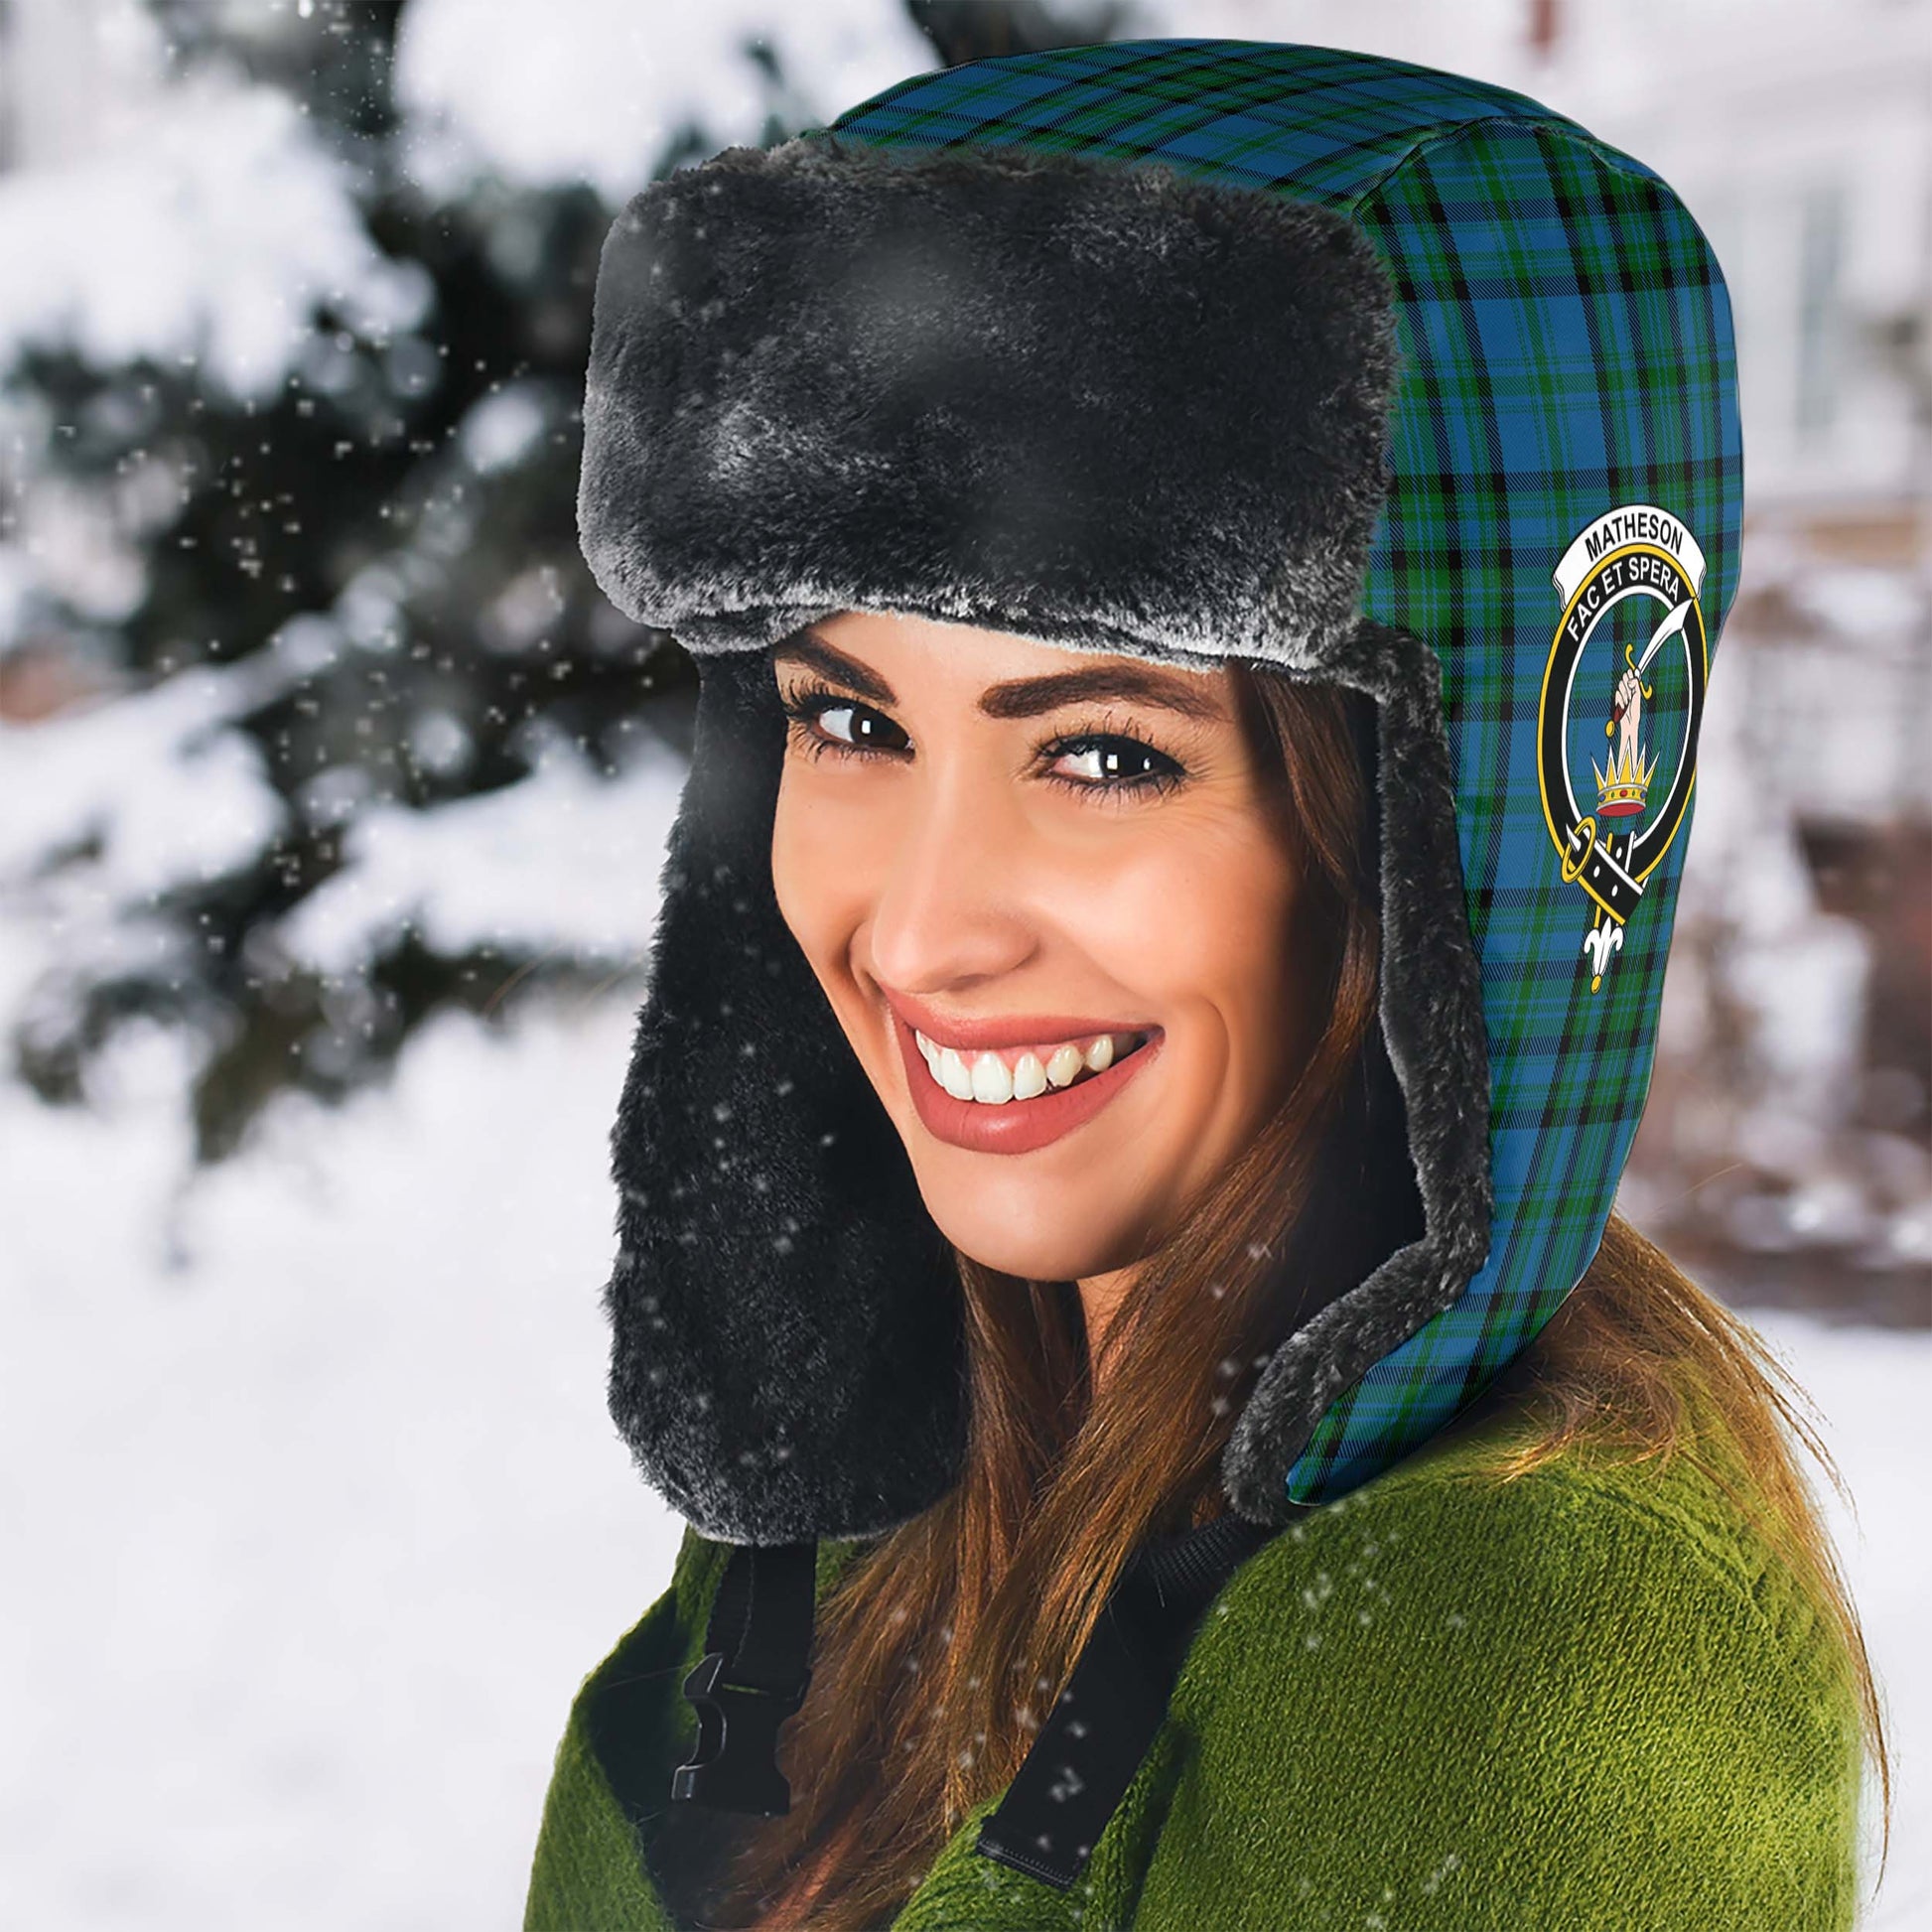 Matheson Hunting Tartan Winter Trapper Hat with Family Crest - Tartanvibesclothing